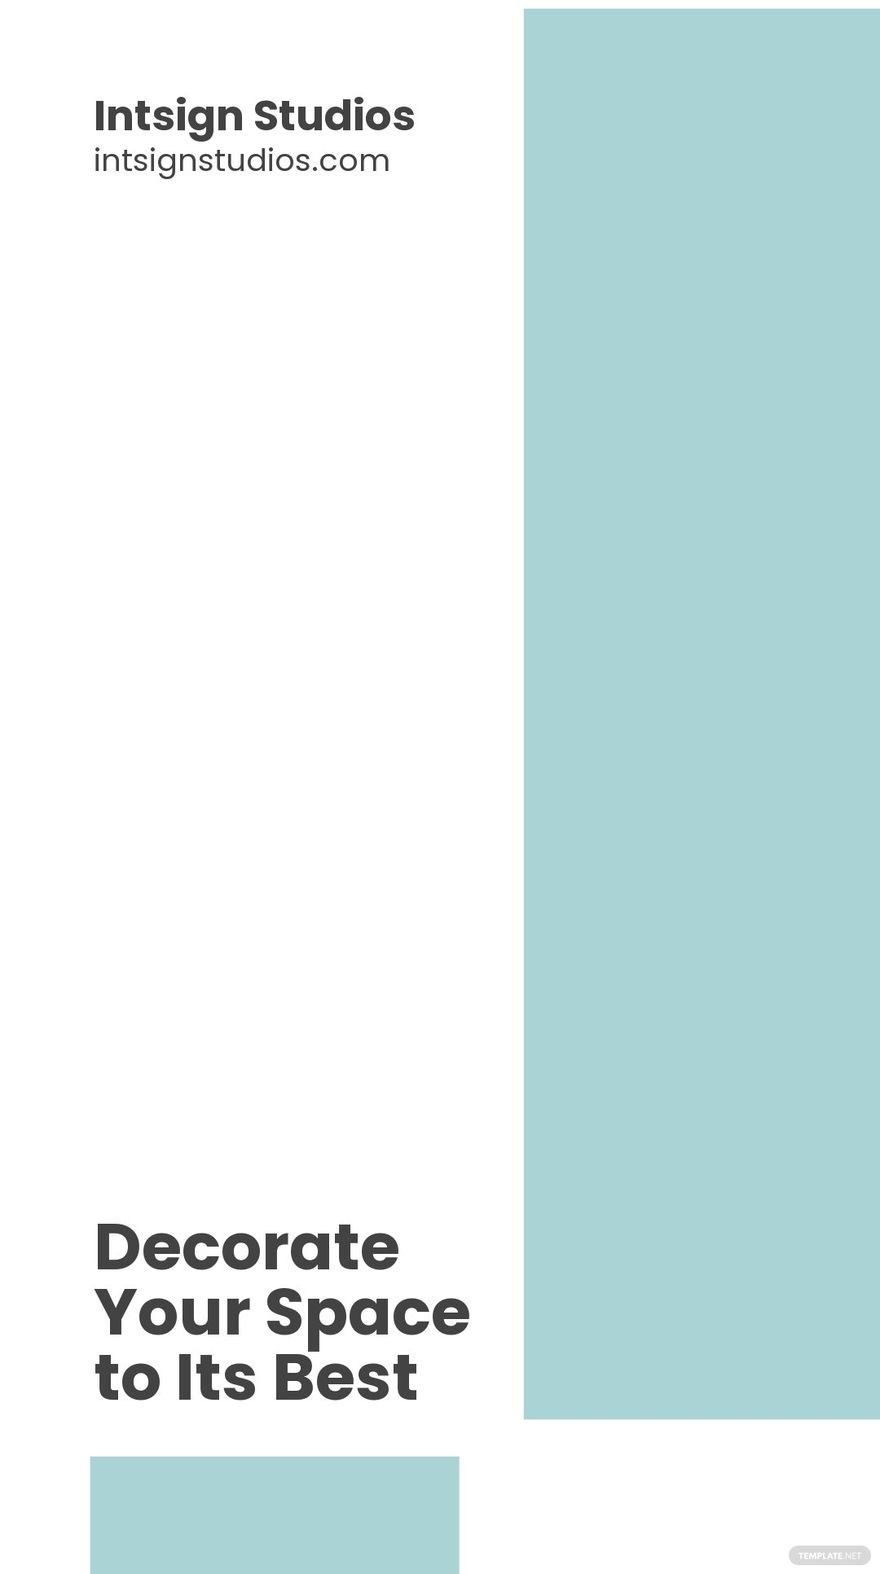 Free Interior Design Business Snapchat Geofilter Template